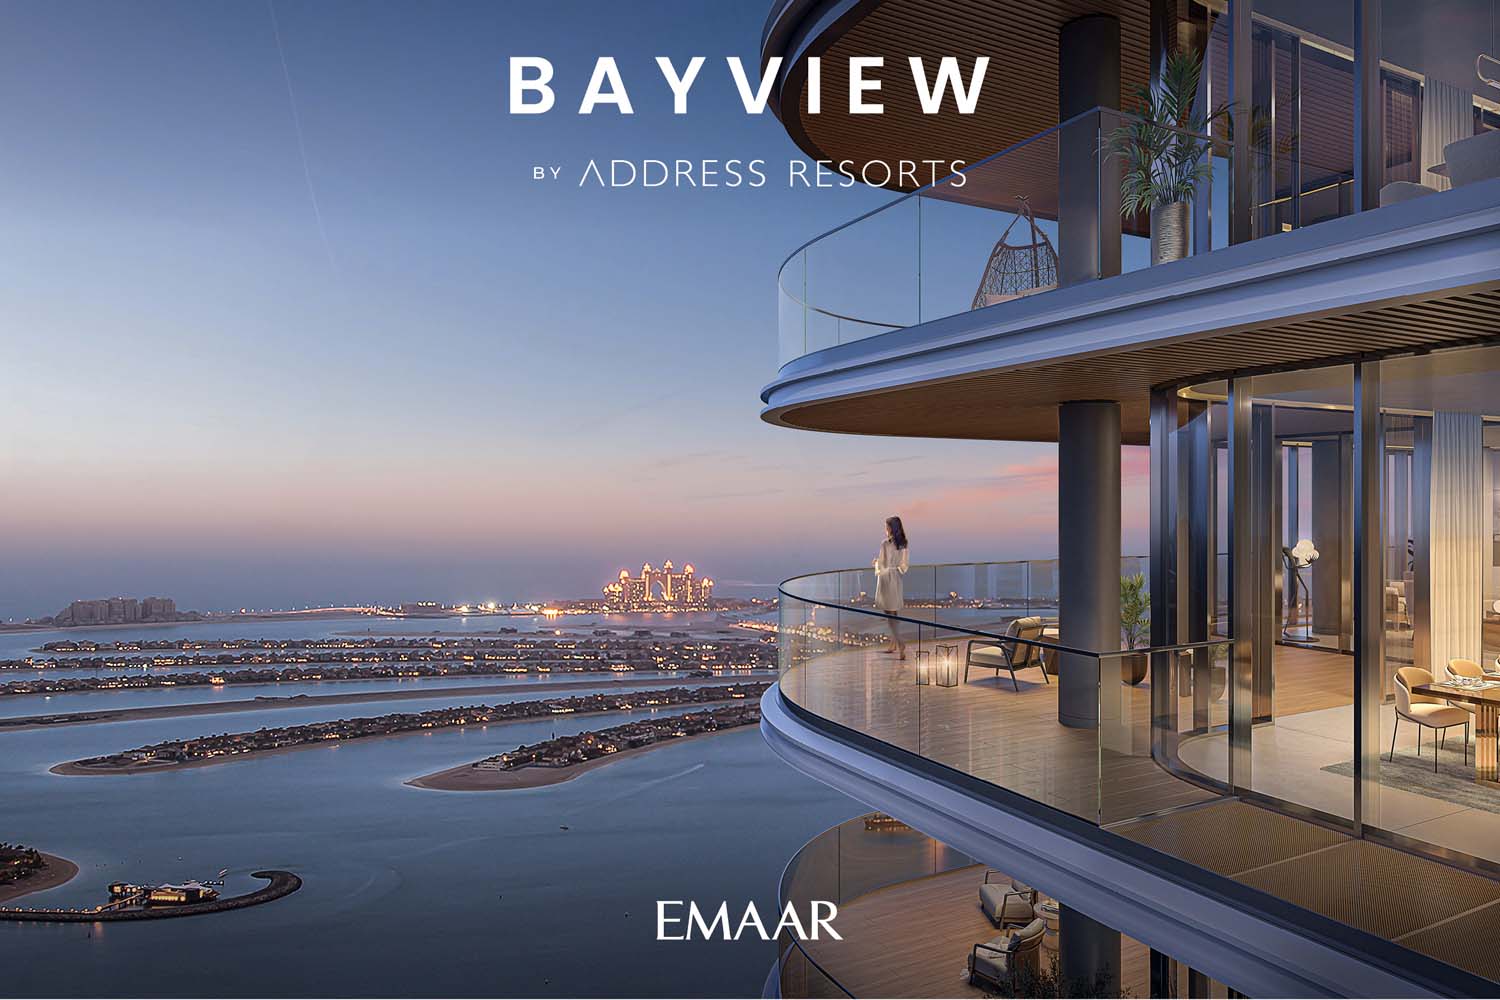 latest-project-in-dubai-bayview-by-address-resorts-for-sale-in-emaar-beachfront